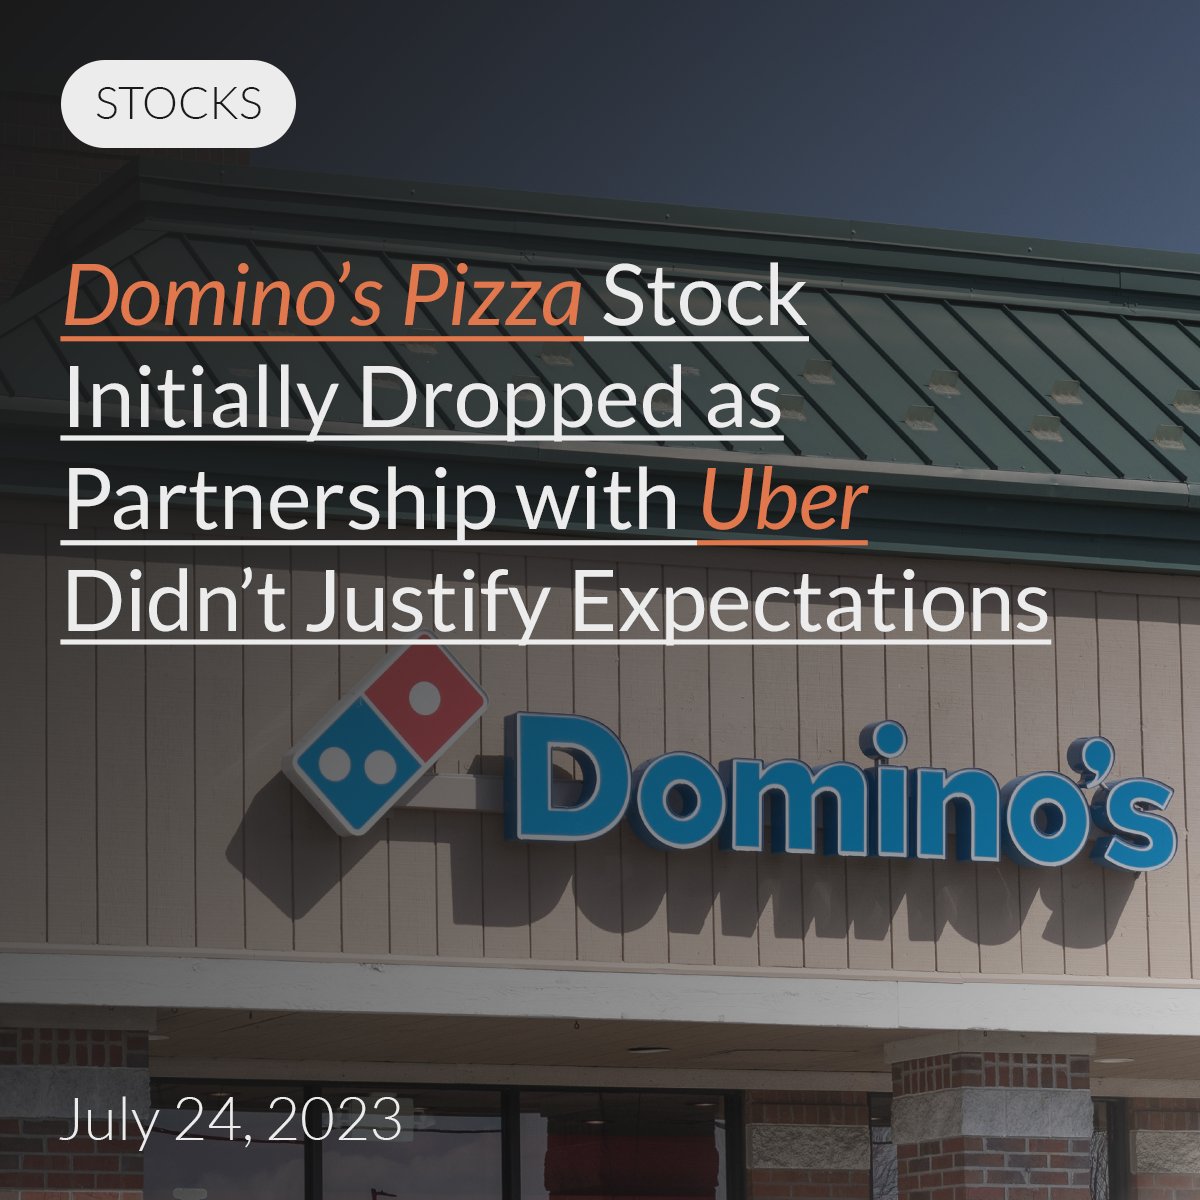 Domino’s Pizza Stock Initially Dropped as Partnership with Uber Didn’t Justify Expectations
Domino's Pizza (DPZ) missed Wall Street's Q2 sales expectations as higher delivery fees and price hikes aimed at boosting profits hurt...
Read more: https://t.co/RMFIXAAfjH https://t.co/fJtEx4Ioro